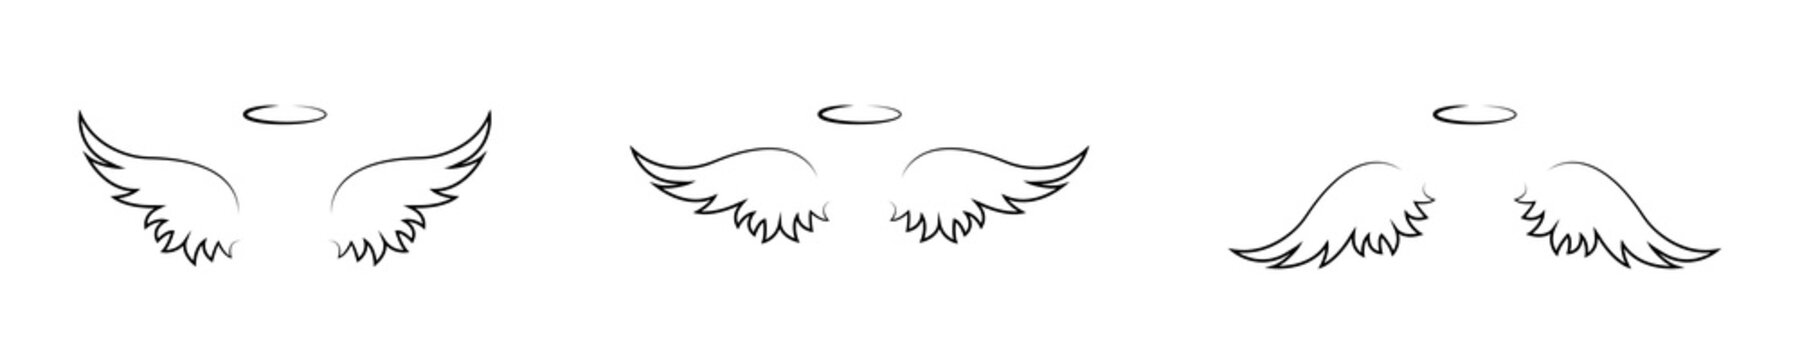 One line drawing wings set isolated on white background. Angel wings silhouette collection. Religious sign symbol icon set. Vector graphic.